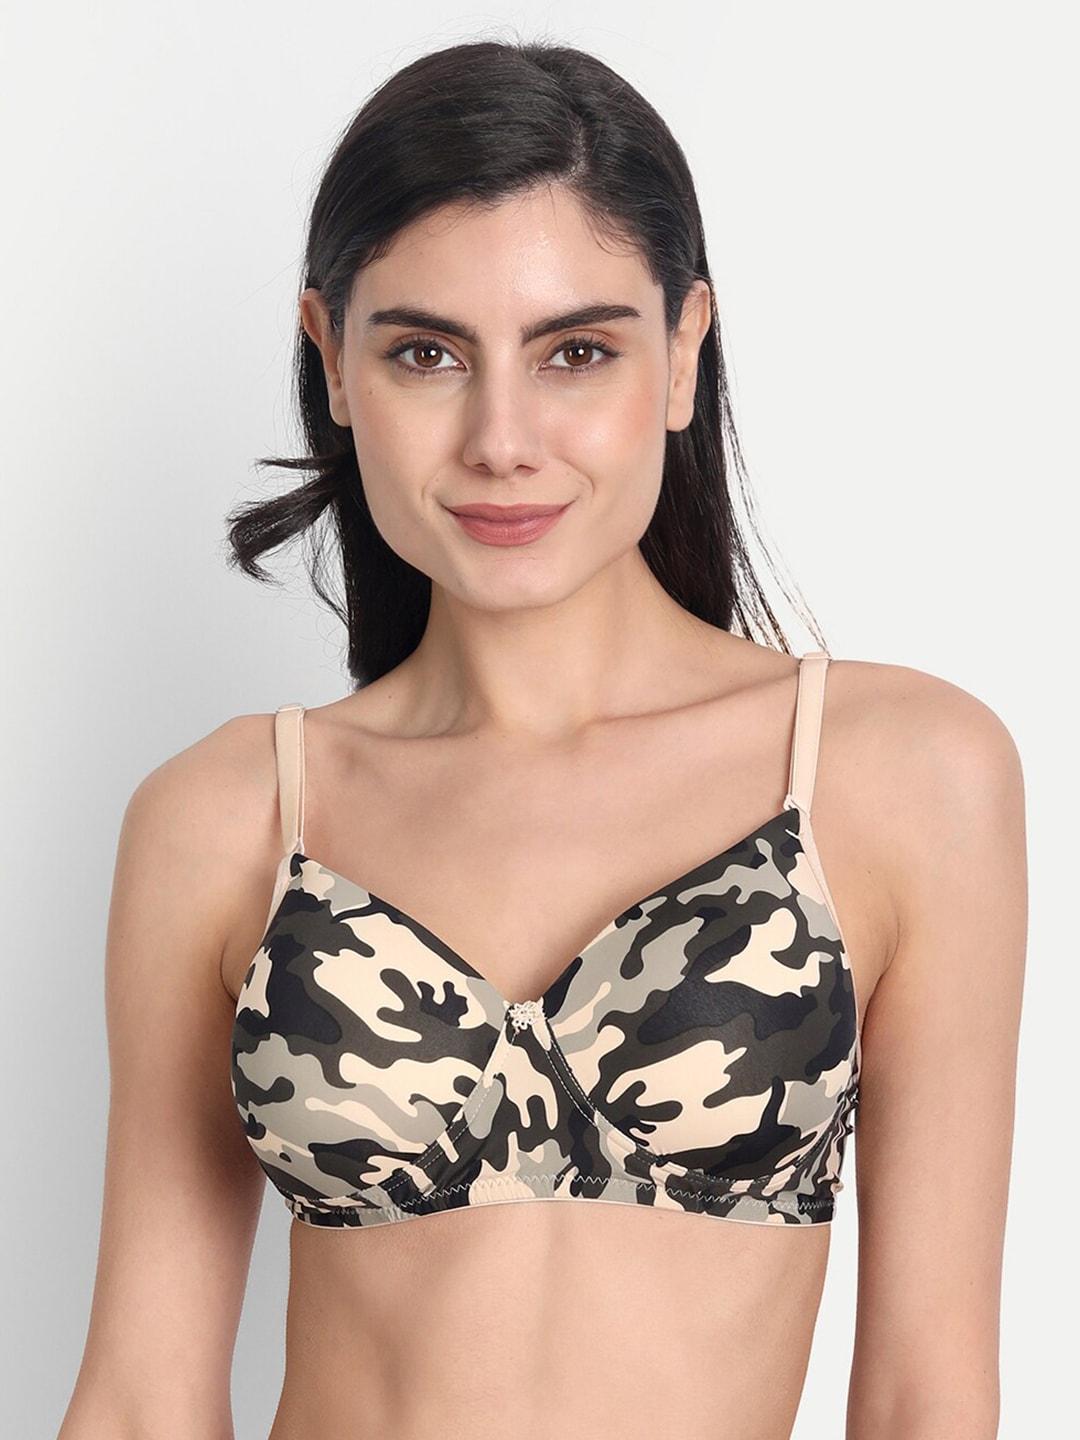 aimly abstract printed full coverage seamless heavily padded non-wired dry-fit push-up bra